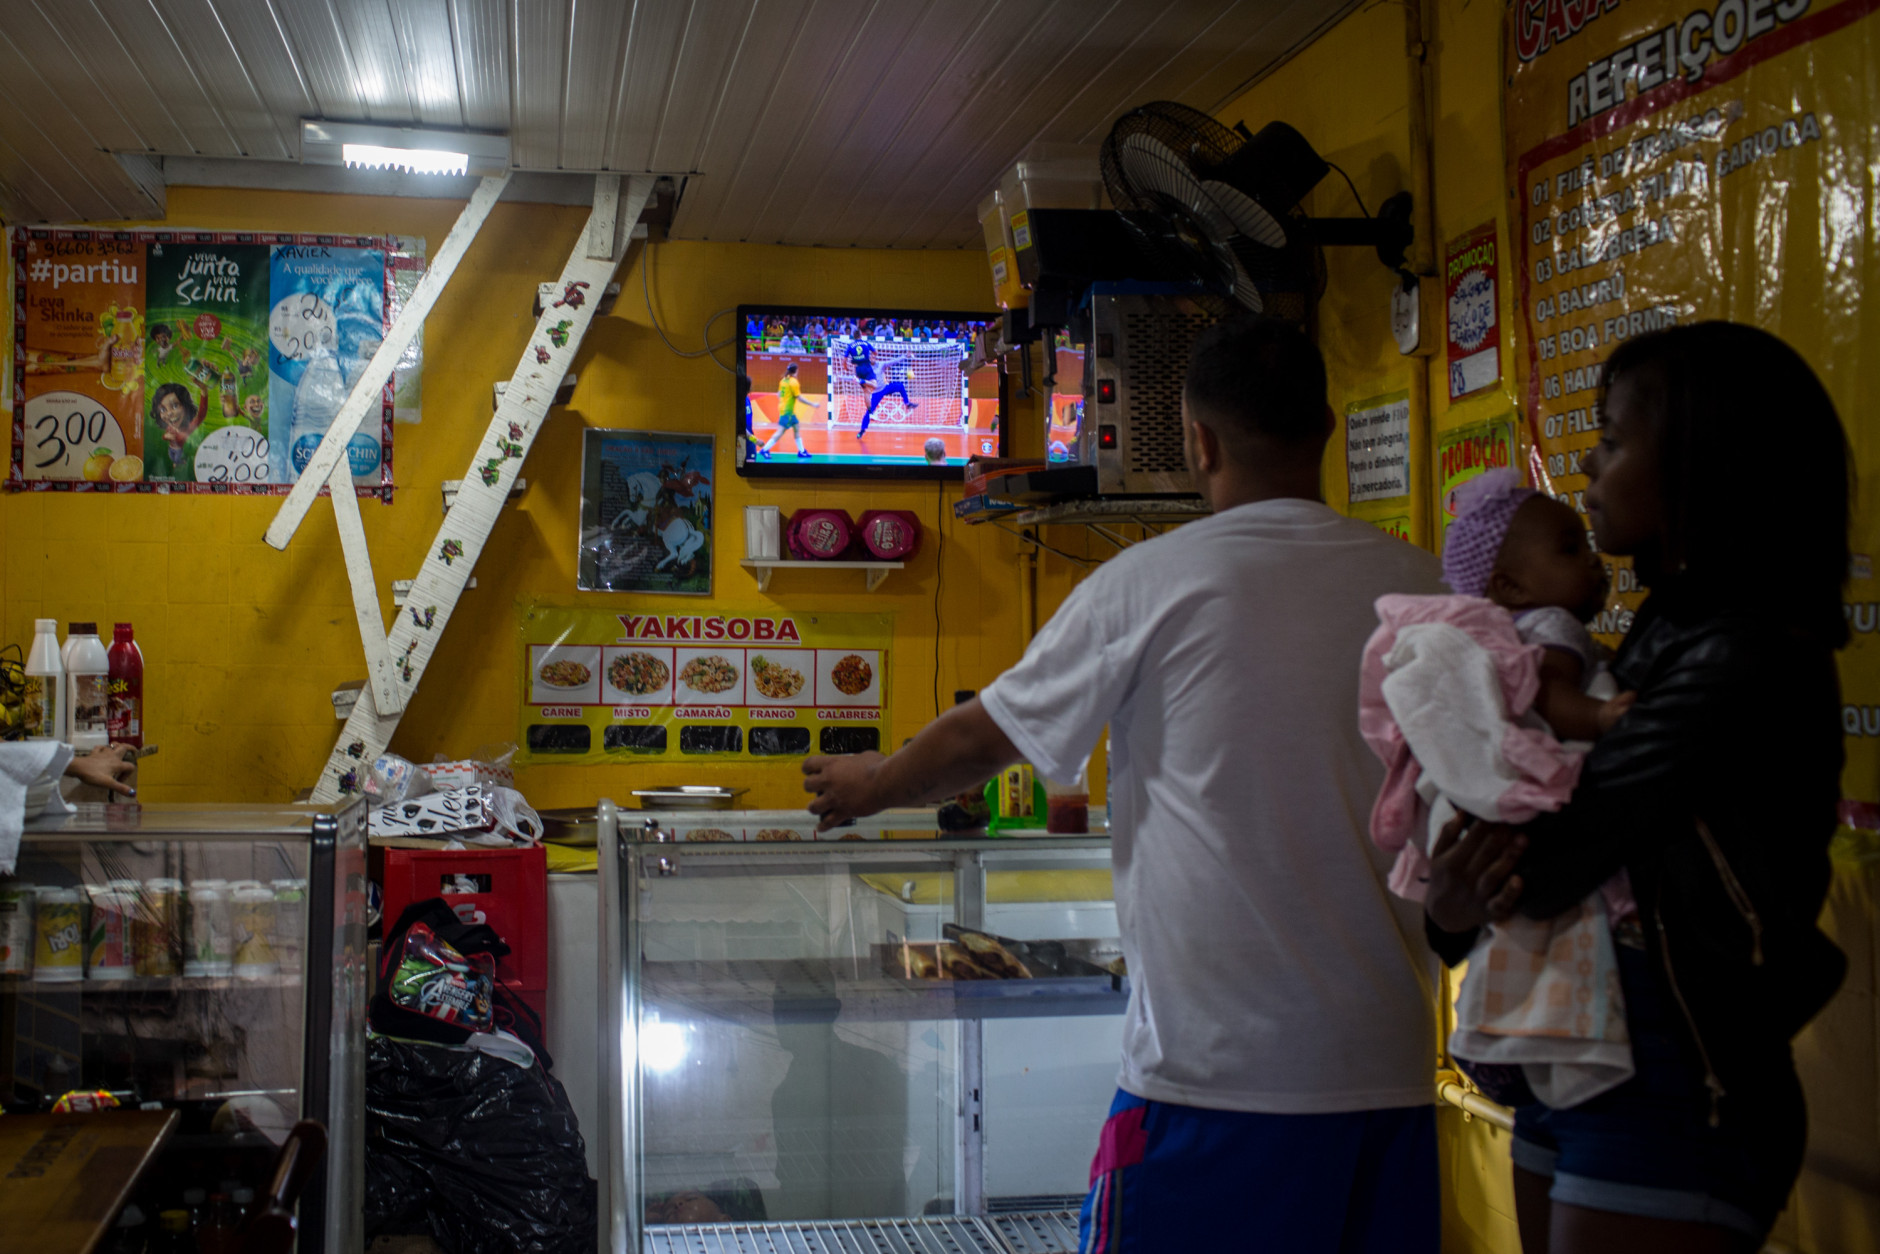 RIO DE JANEIRO, BRAZIL - AUGUST 15:  People watch the Olympic games on a tv screen at a neighbourhood shop on the outskirts of a 'favela' community on August 15, 2016 in Rio de Janeiro, Brazil.  Brazil is currently hosting the 2016 Summer Olympic games despite the dismissal of President Dilma Rousseff, pollution concerns, ongoing crime problems and a failing economy. Around 1.4 million residents, or approximately 22 percent of Rio's population, reside in favelas which often lack proper sanitation, health care, education and security, for many of these residents watching the Olympic games on tv is their only access to the event.  (Photo by Chris McGrath/Getty Images)